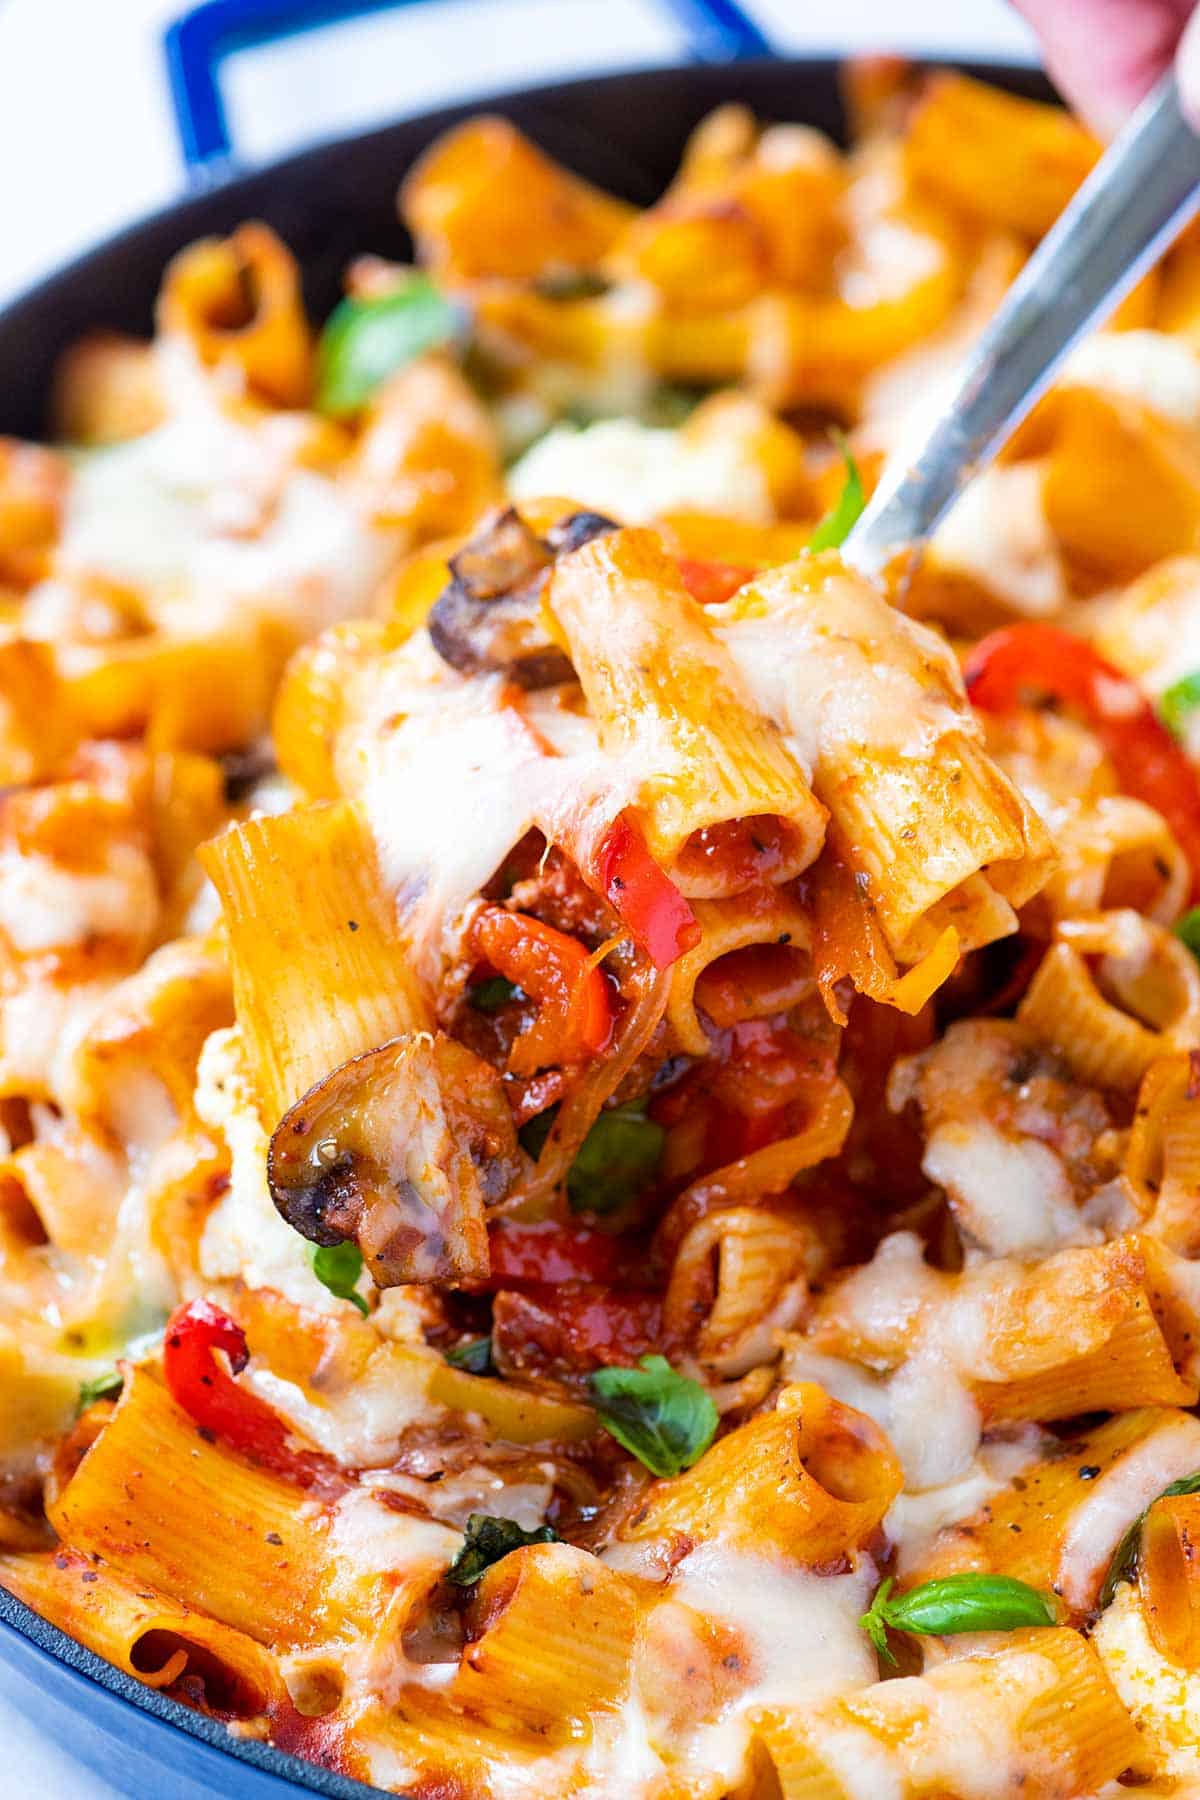 Baked Pasta with Lots of Vegetables